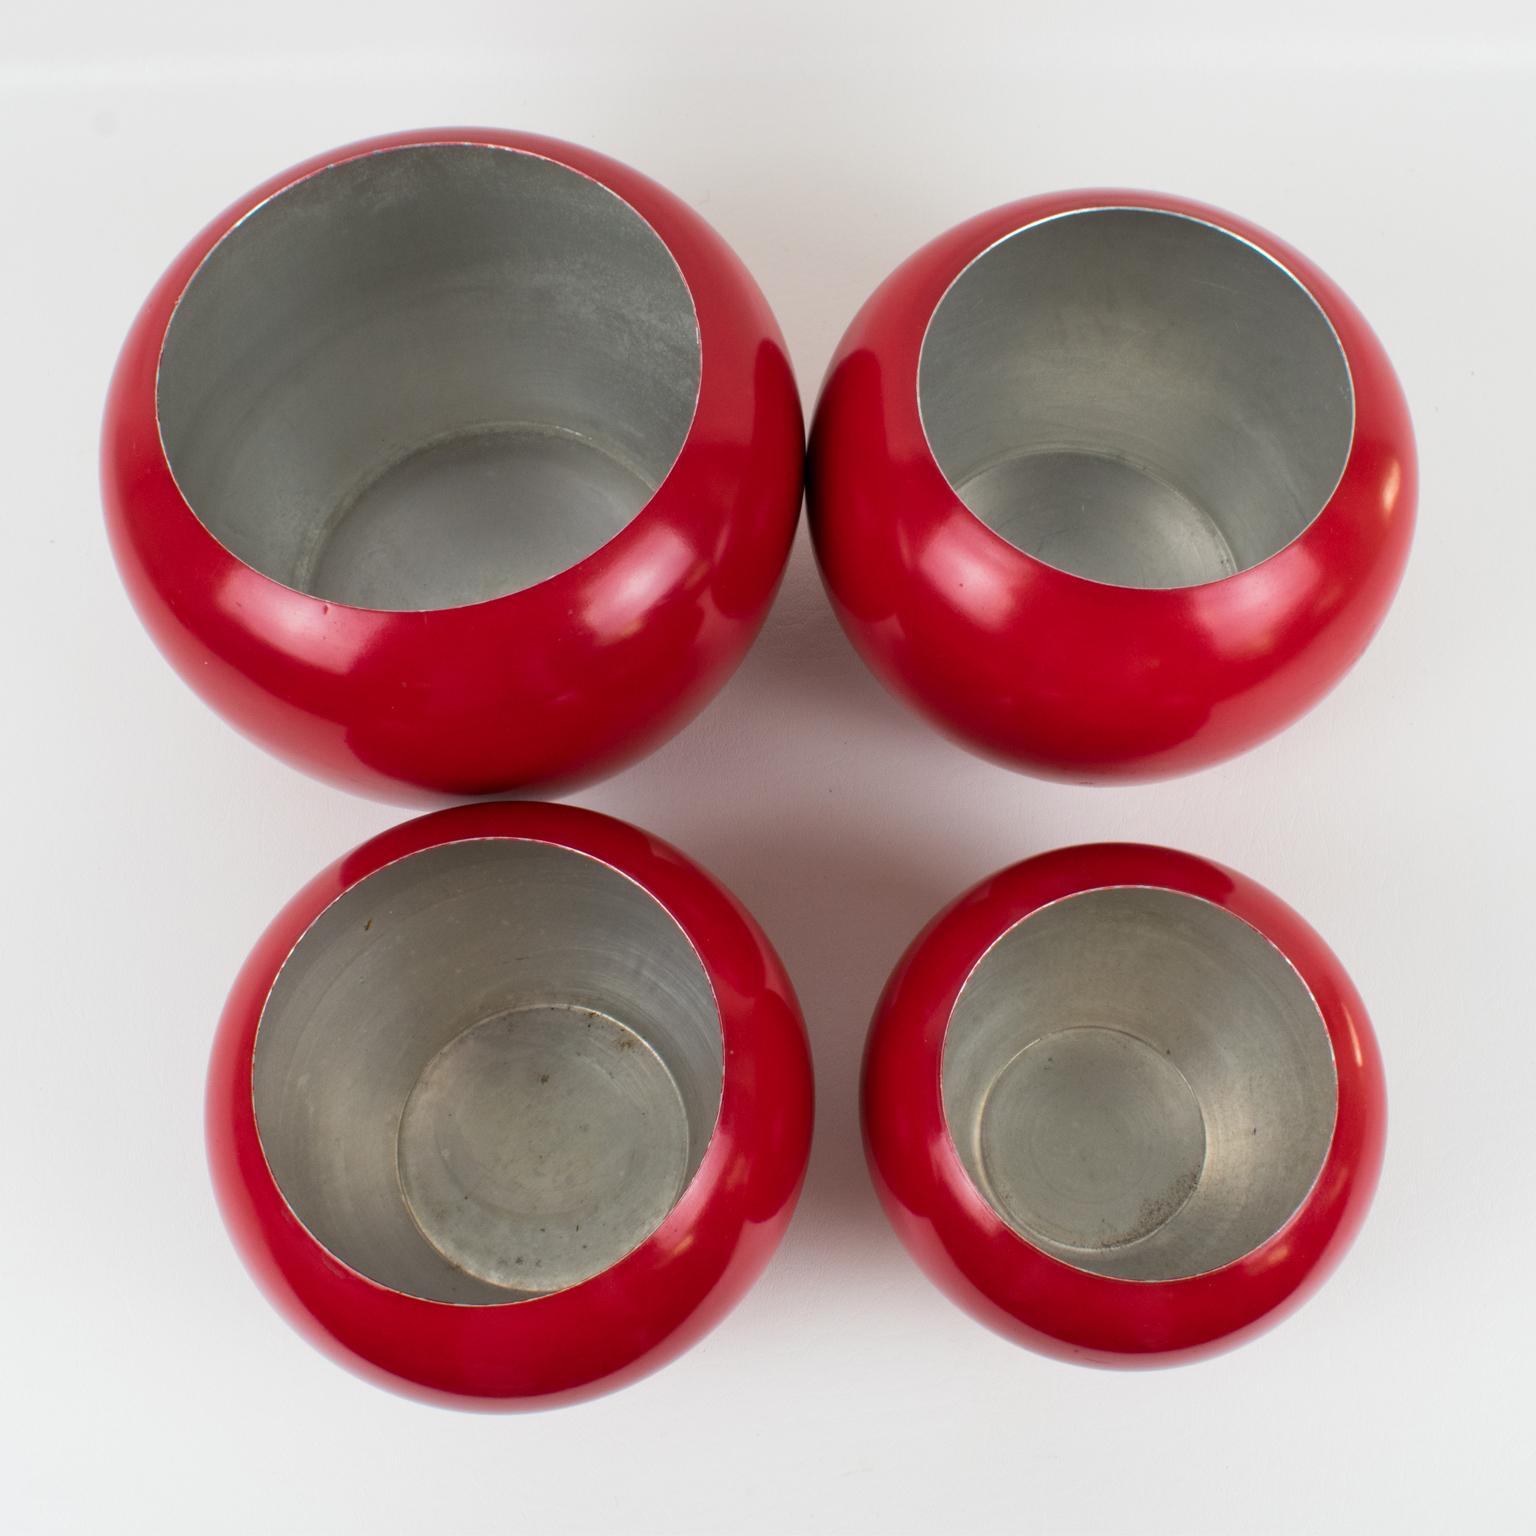 American Mid-Century Kitchen Canisters Cookie Jar Red Enamel Aluminum Apple, Set of 4 Pc